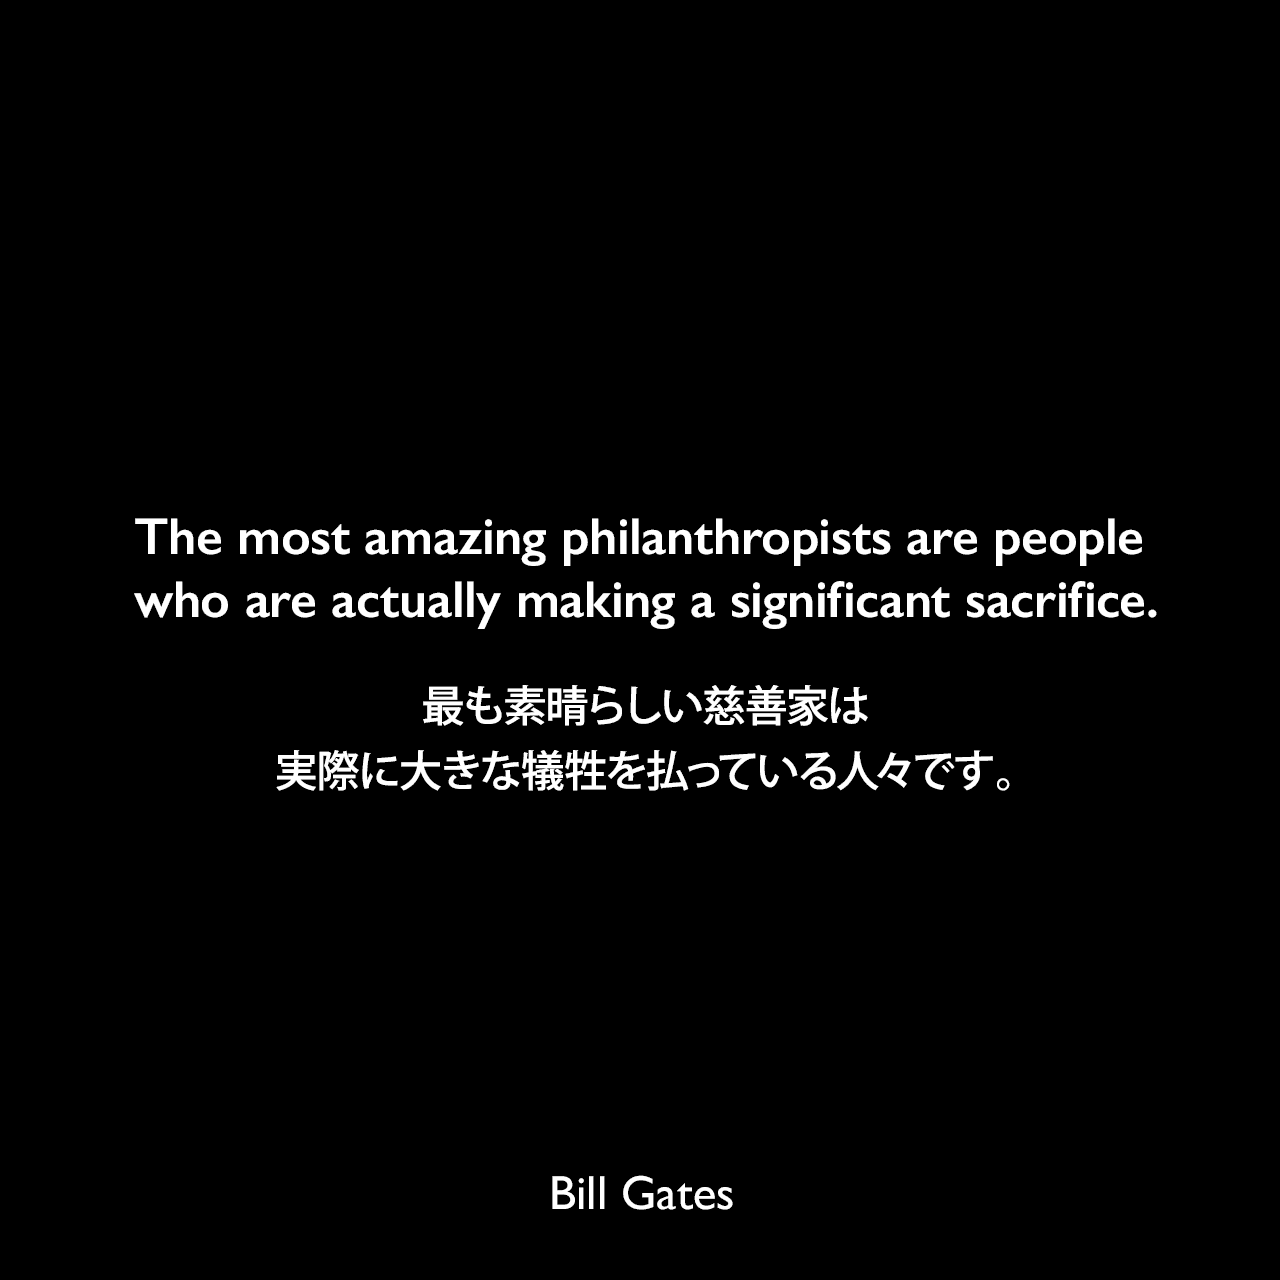 The most amazing philanthropists are people who are actually making a significant sacrifice.最も素晴らしい慈善家は、実際に大きな犠牲を払っている人々です。Bill Gates